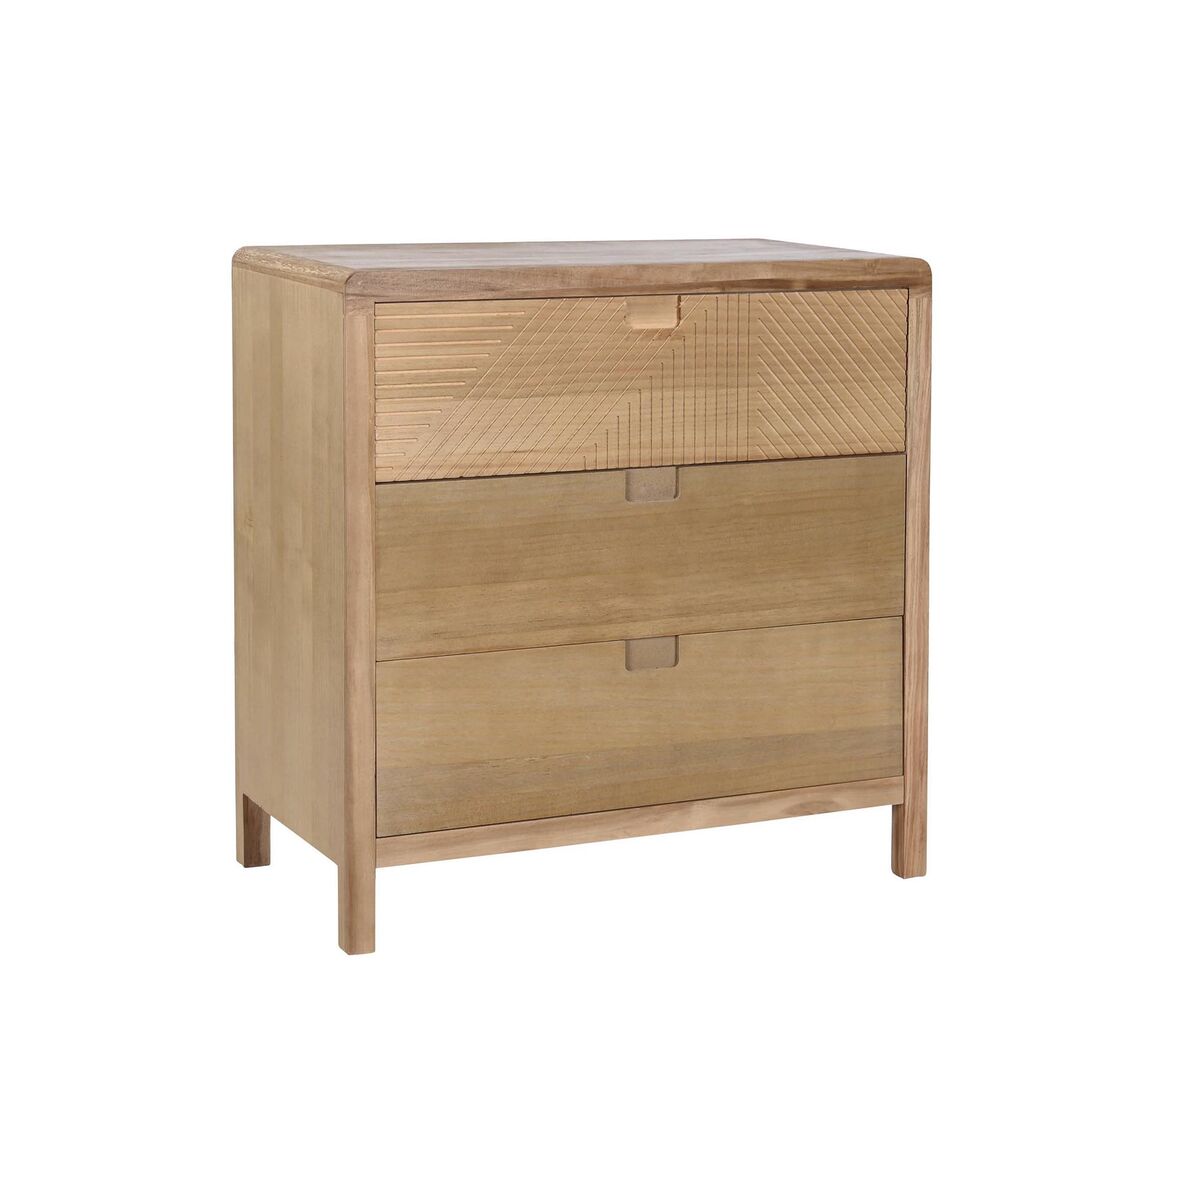 Chest of drawers in Pinewood (80 x 40 x 80 cm)